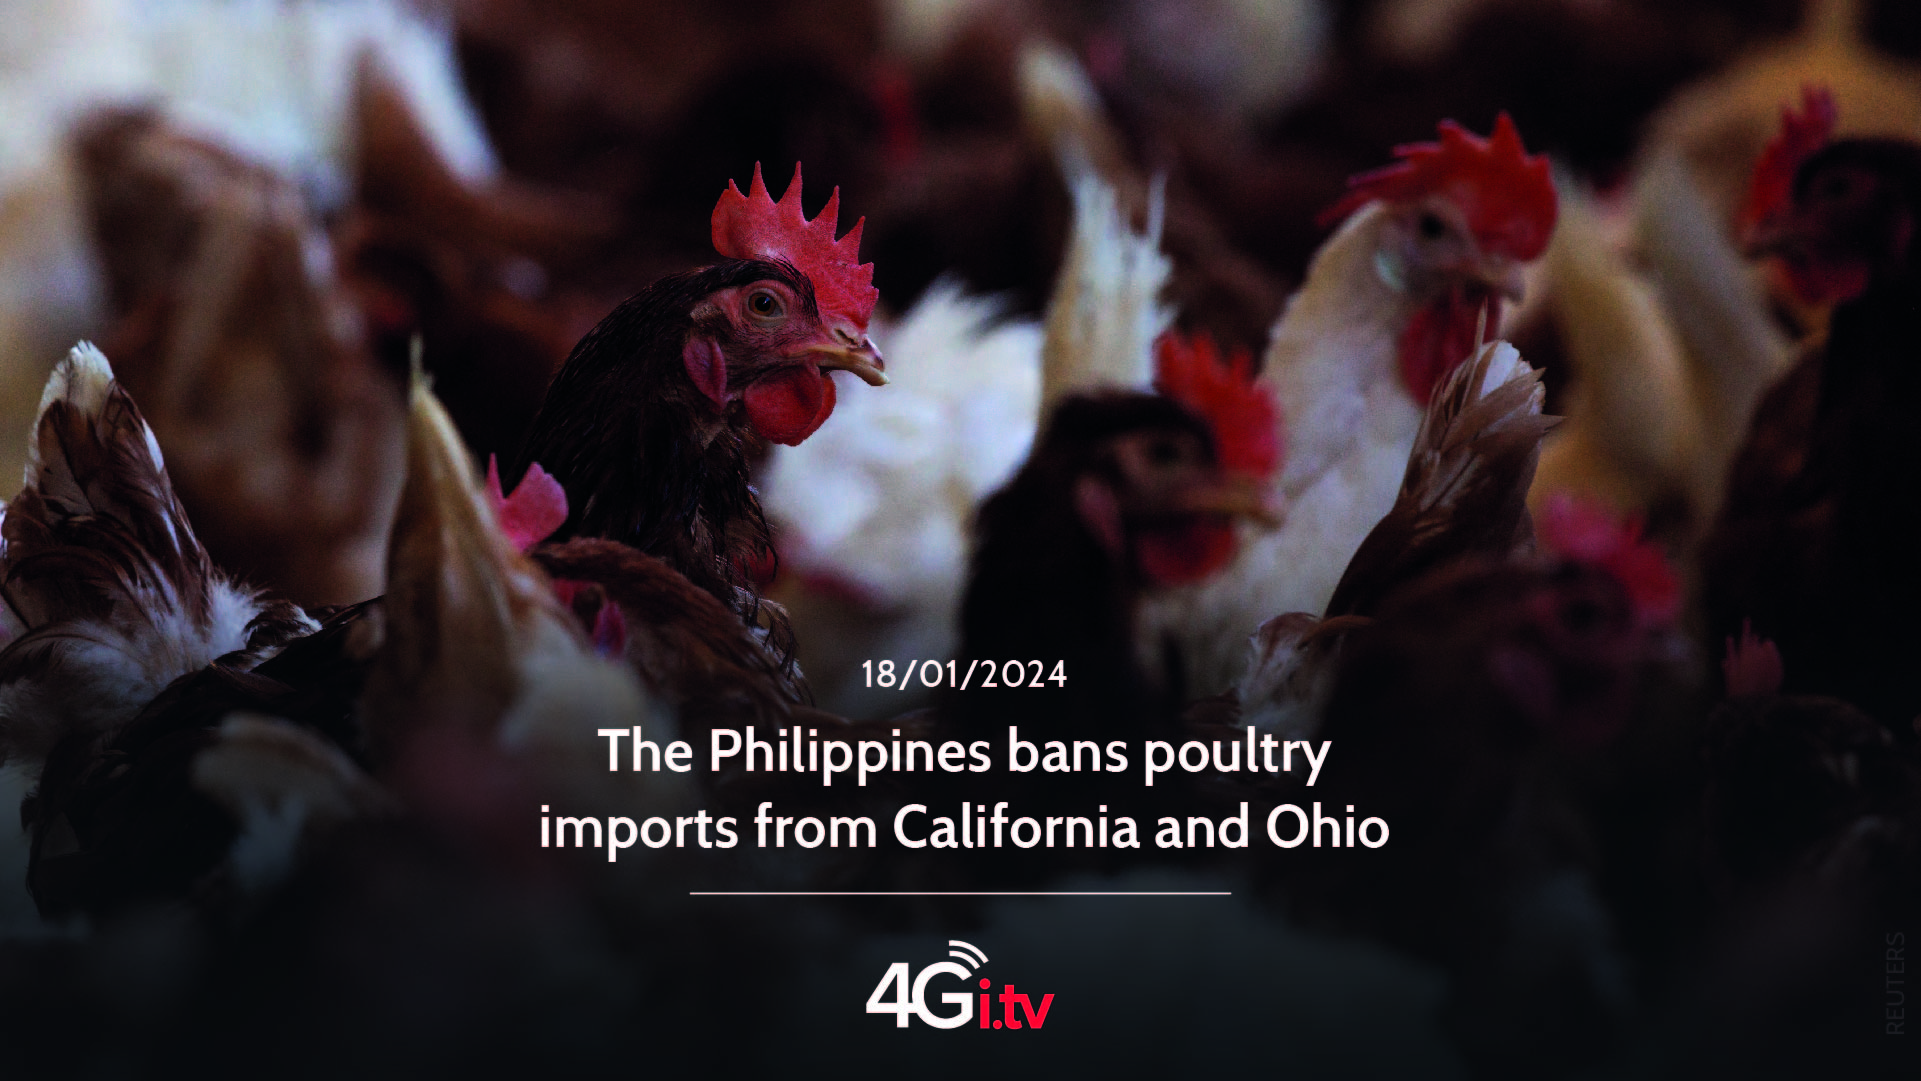 Lesen Sie mehr über den Artikel The Philippines bans poultry imports from California and Ohio